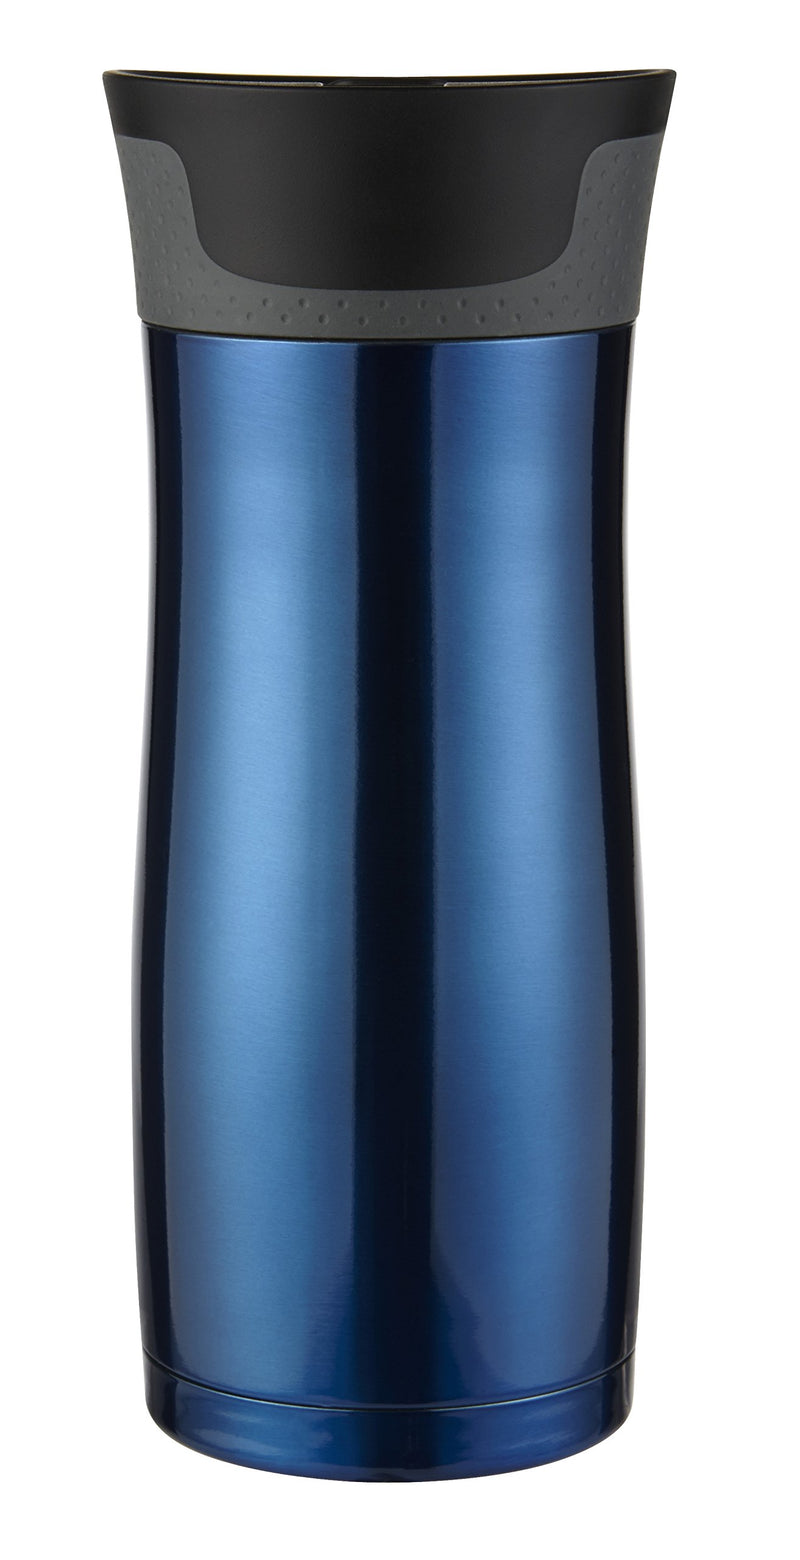  [AUSTRALIA] - Contigo Autoseal West Loop Vaccuum-Insulated Stainless Steel Travel Mug, 16 Oz, Stainless Steel/Monaco Blue, 2-Pack No Handle 16 Ounce